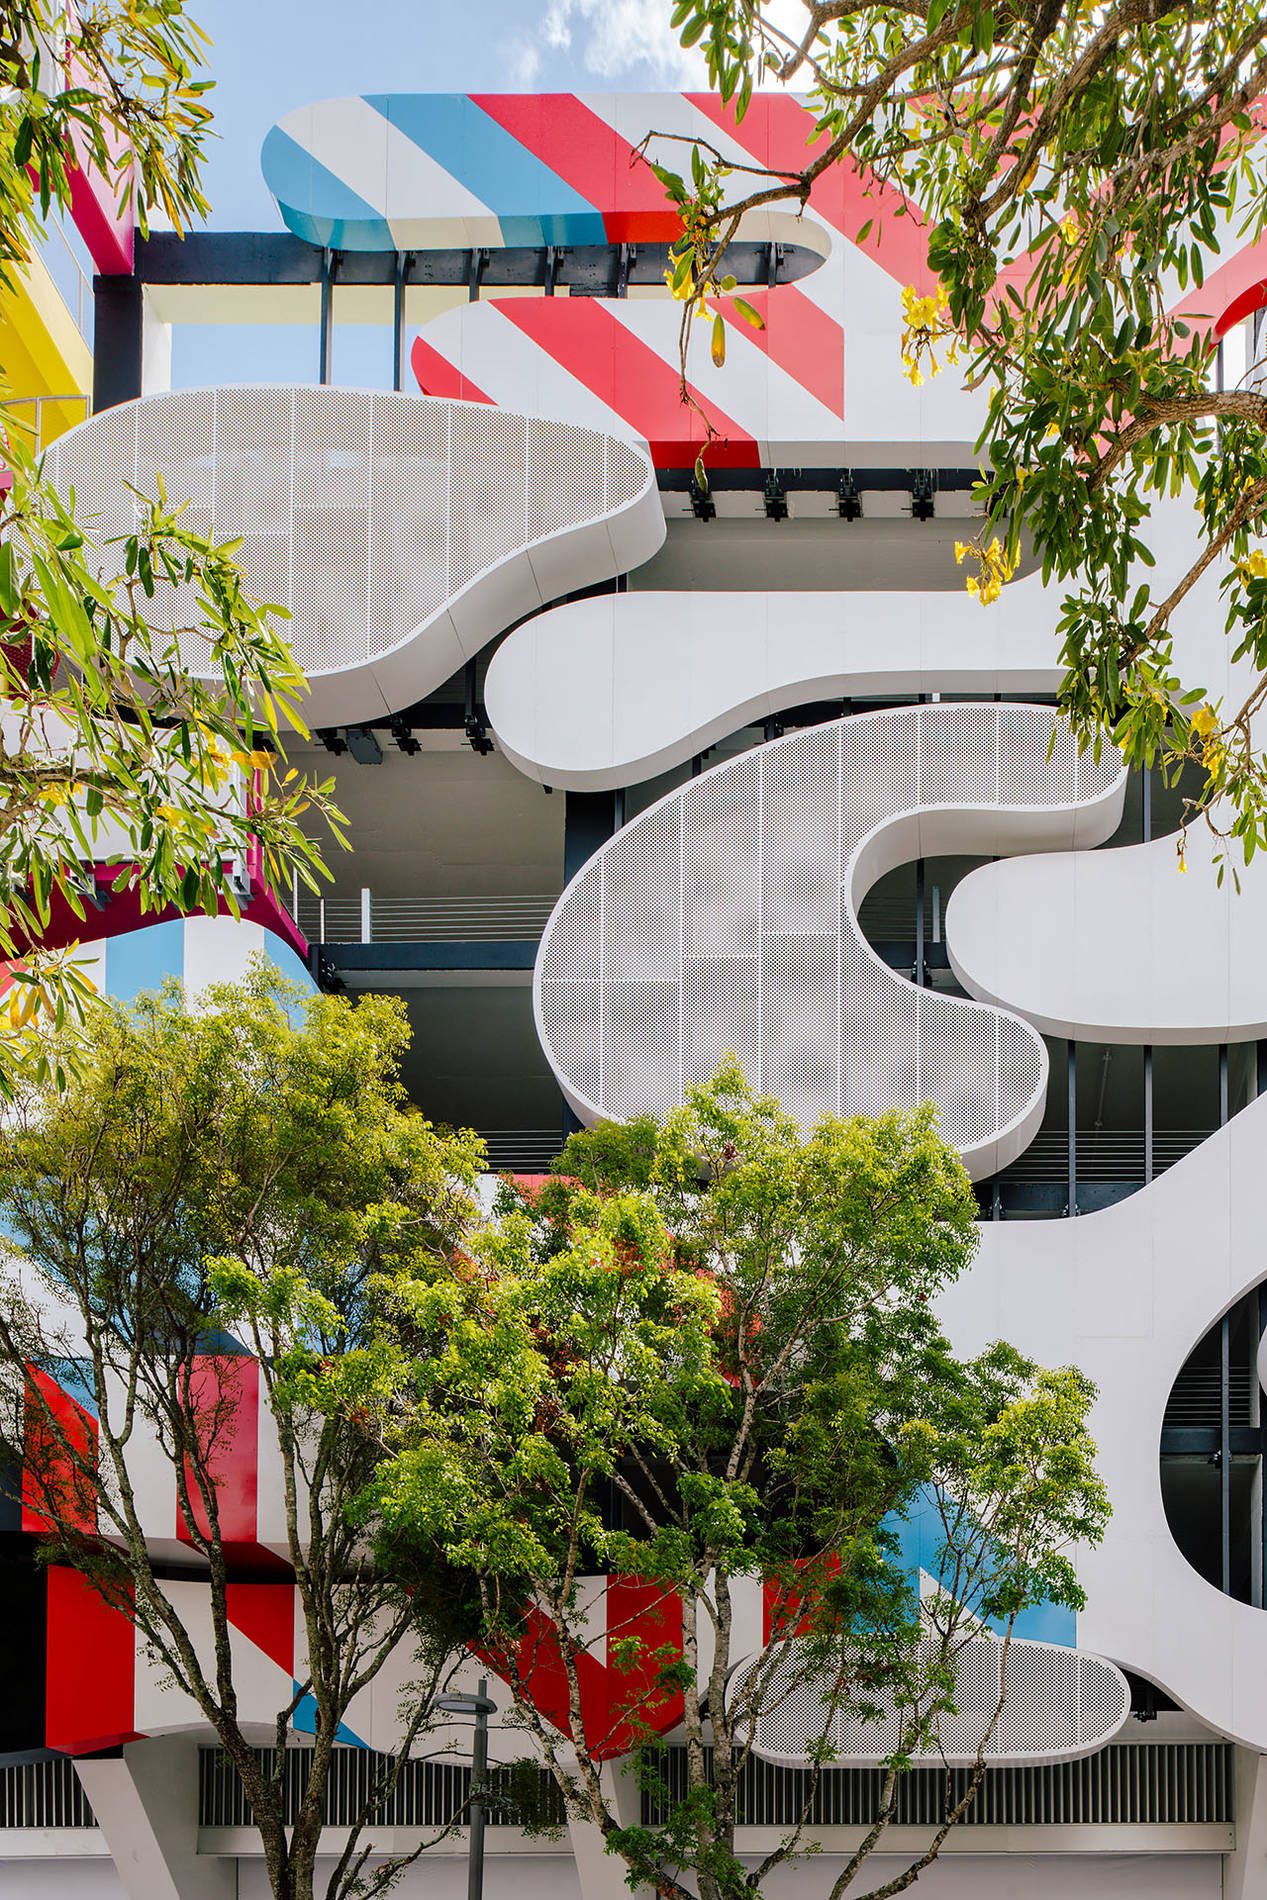 Miami's latest garage project is inspired by surrealist games